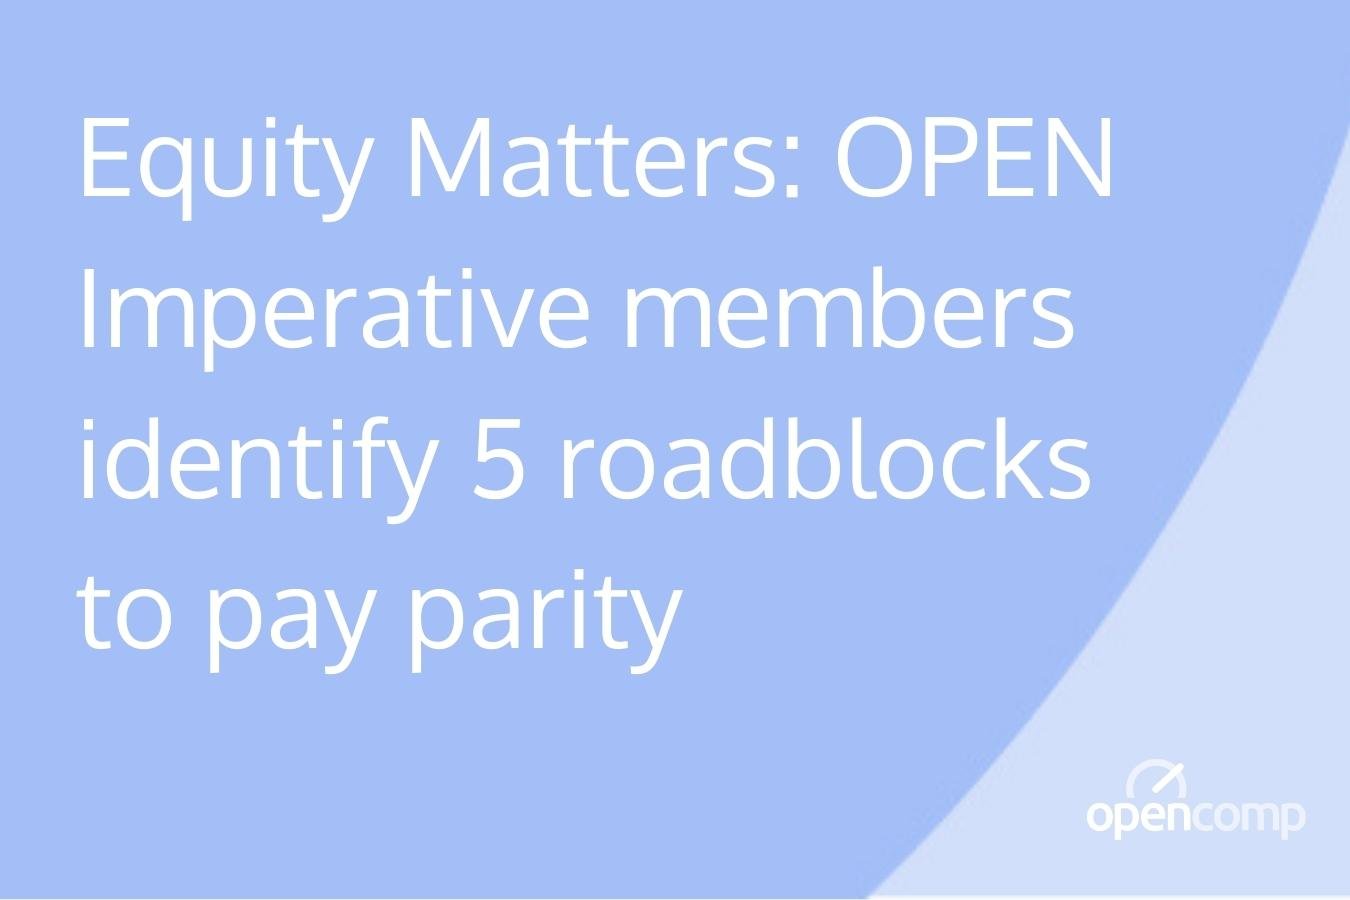 Equity Matters_ OPEN Imperative members identify 5 roadblocks to pay parity